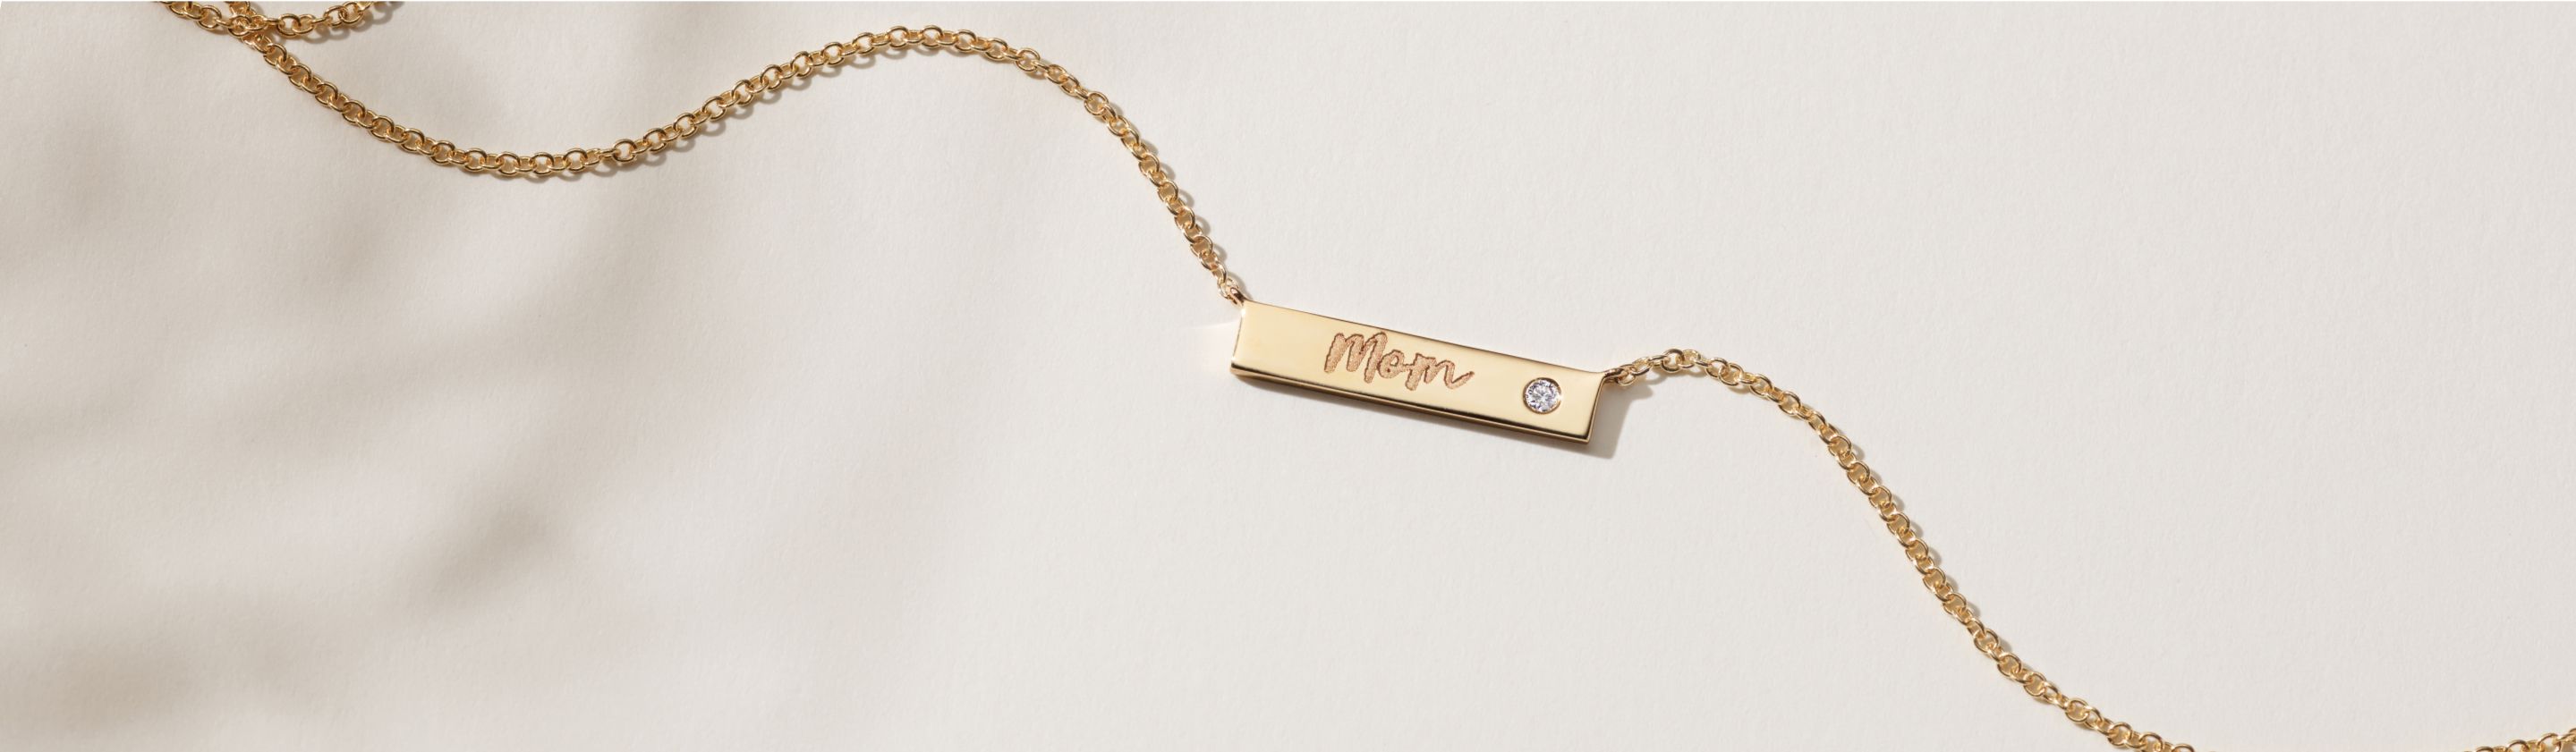 An engraved bar necklace with an inset diamond